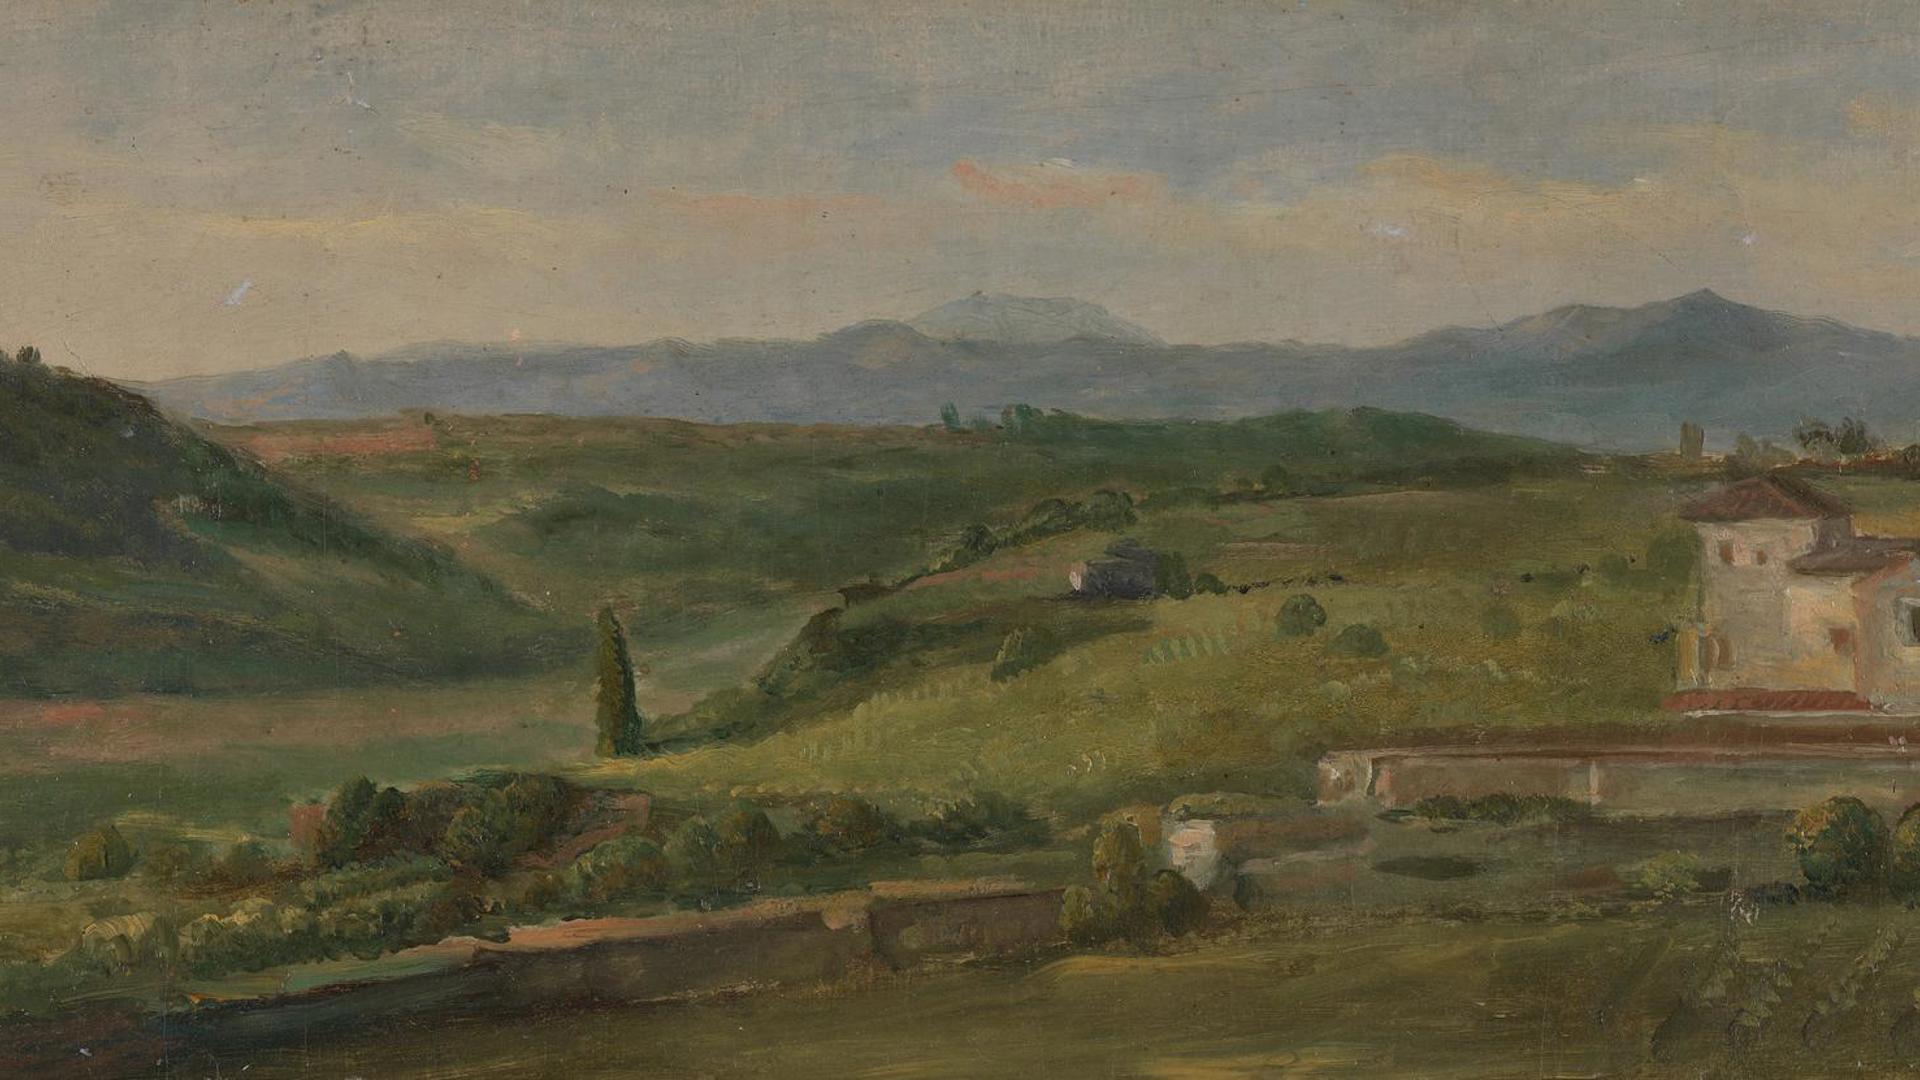 Panoramic Landscape with a Farmhouse by George Frederic Watts